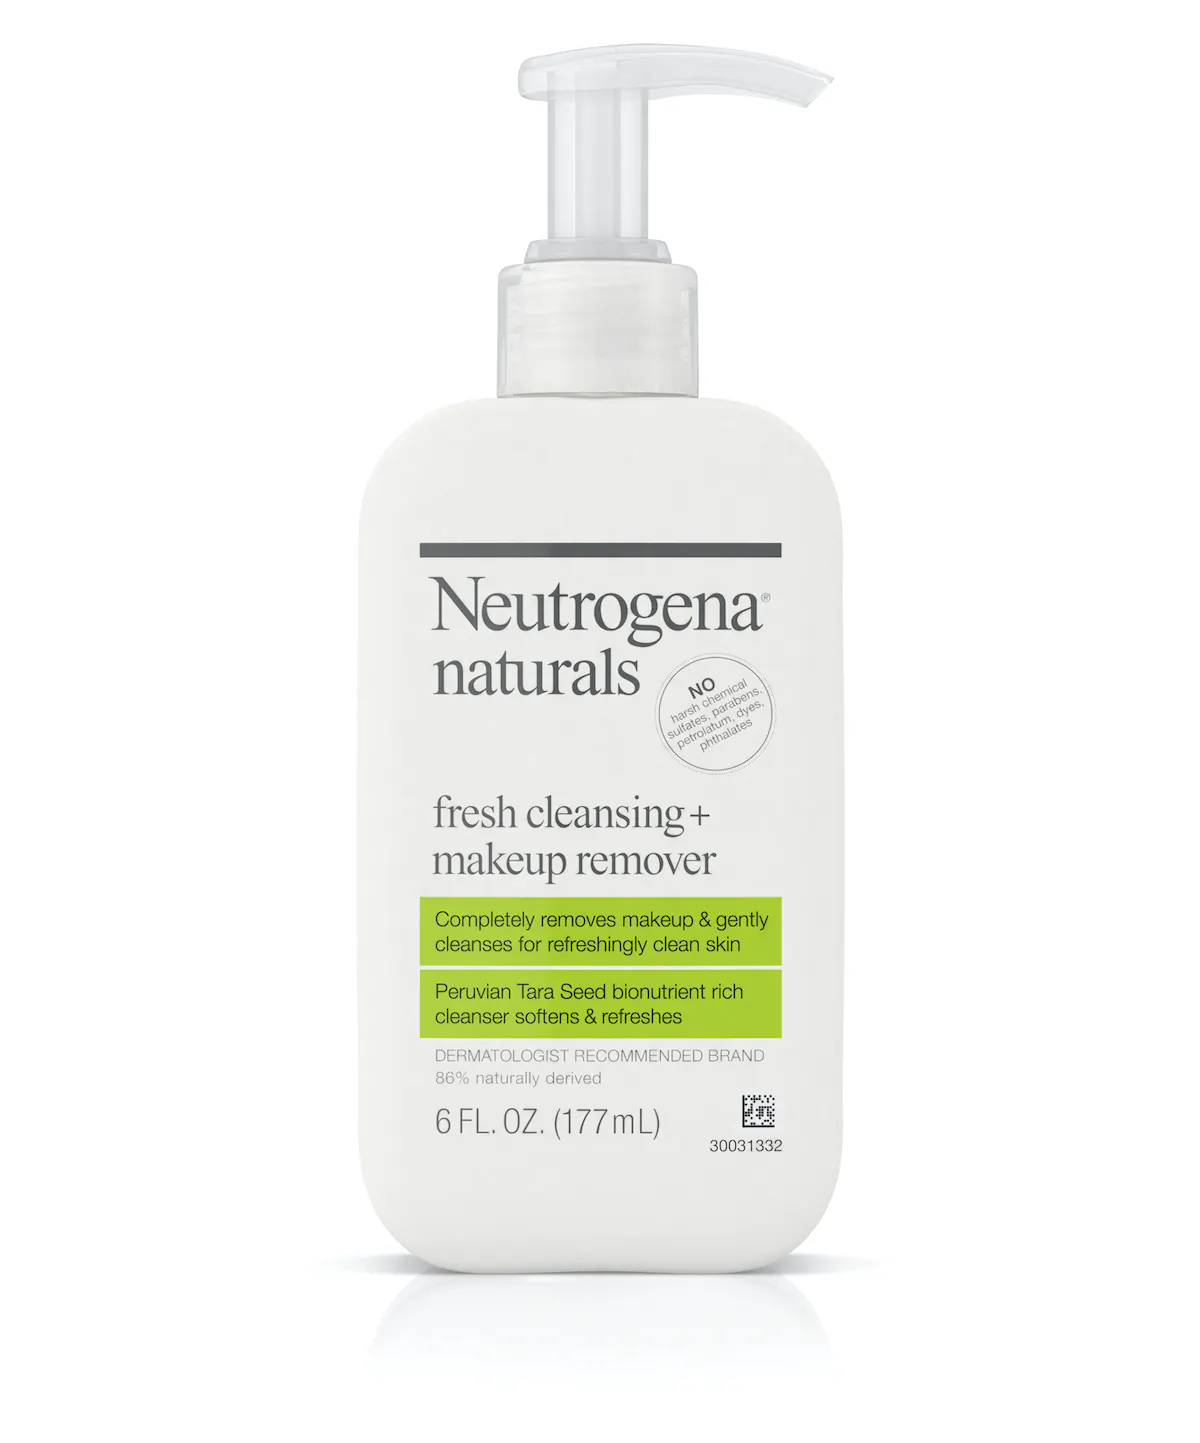 Neutrogena Naturals Fresh Cleansing Daily Face Wash + Makeup Remover